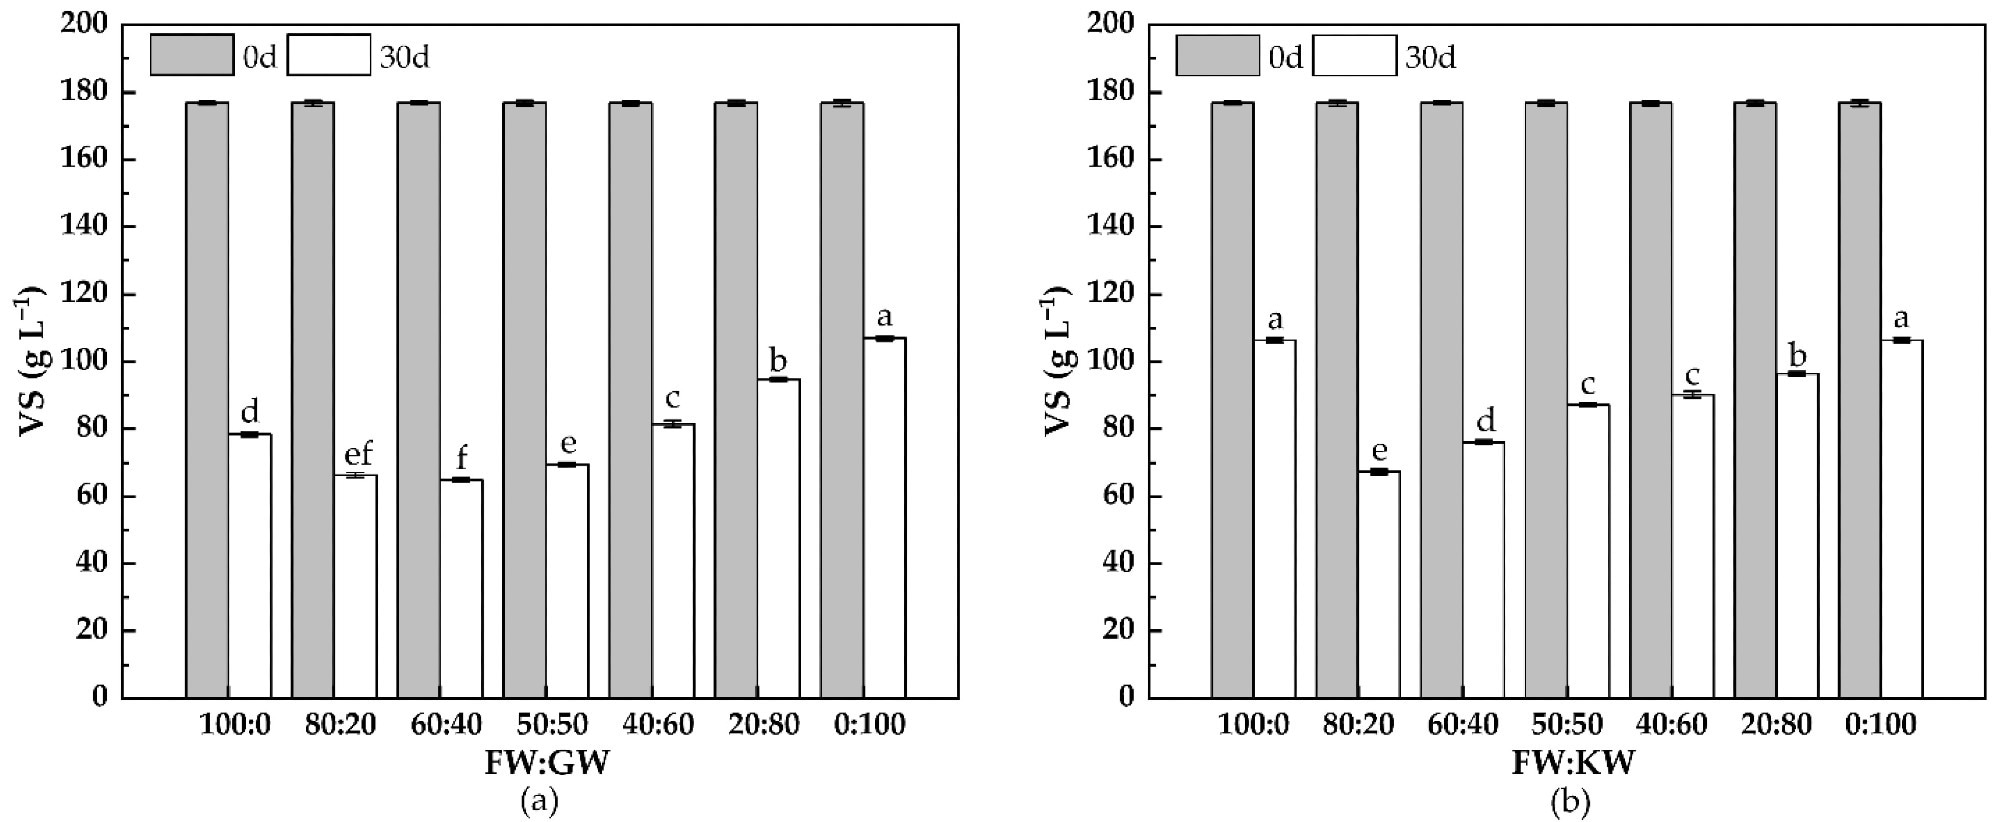 Changes in the VS contents for the thermophilic dry anaerobic co-fermentation of (a) FW + GW and (b) FW + KW. Letters indicate significant differences between the different mixing ratios (p < 0.05).